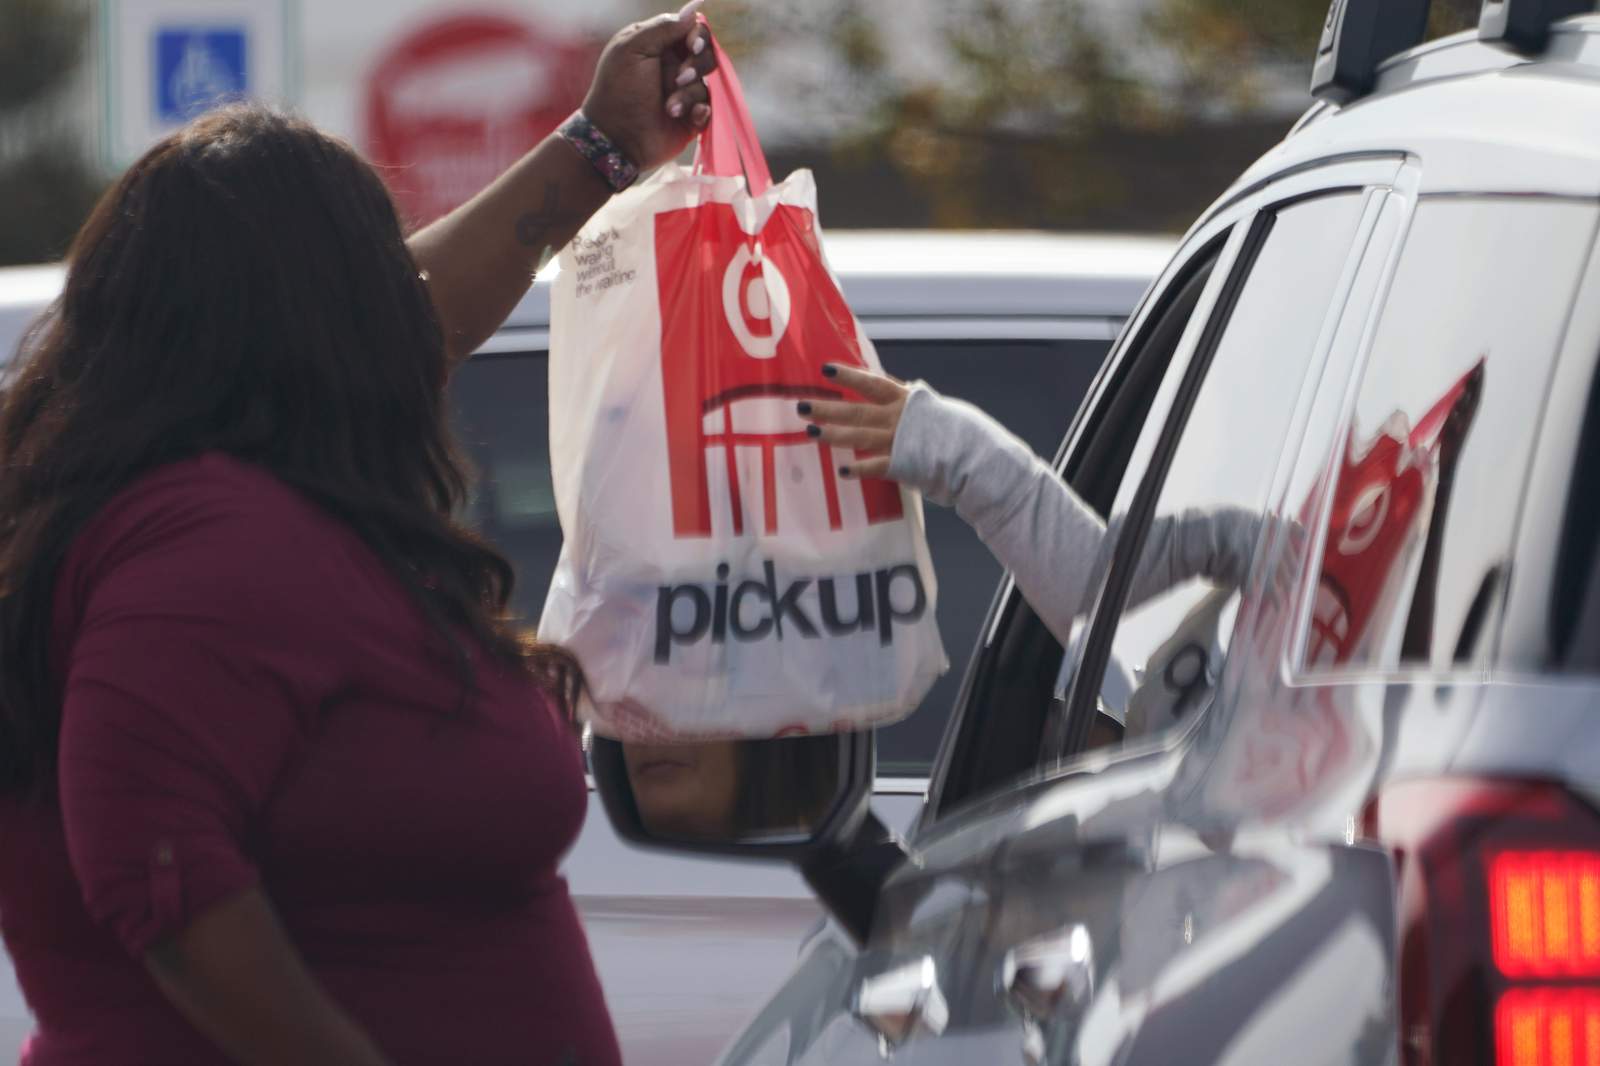 Target gains steam heading into crucial holiday season